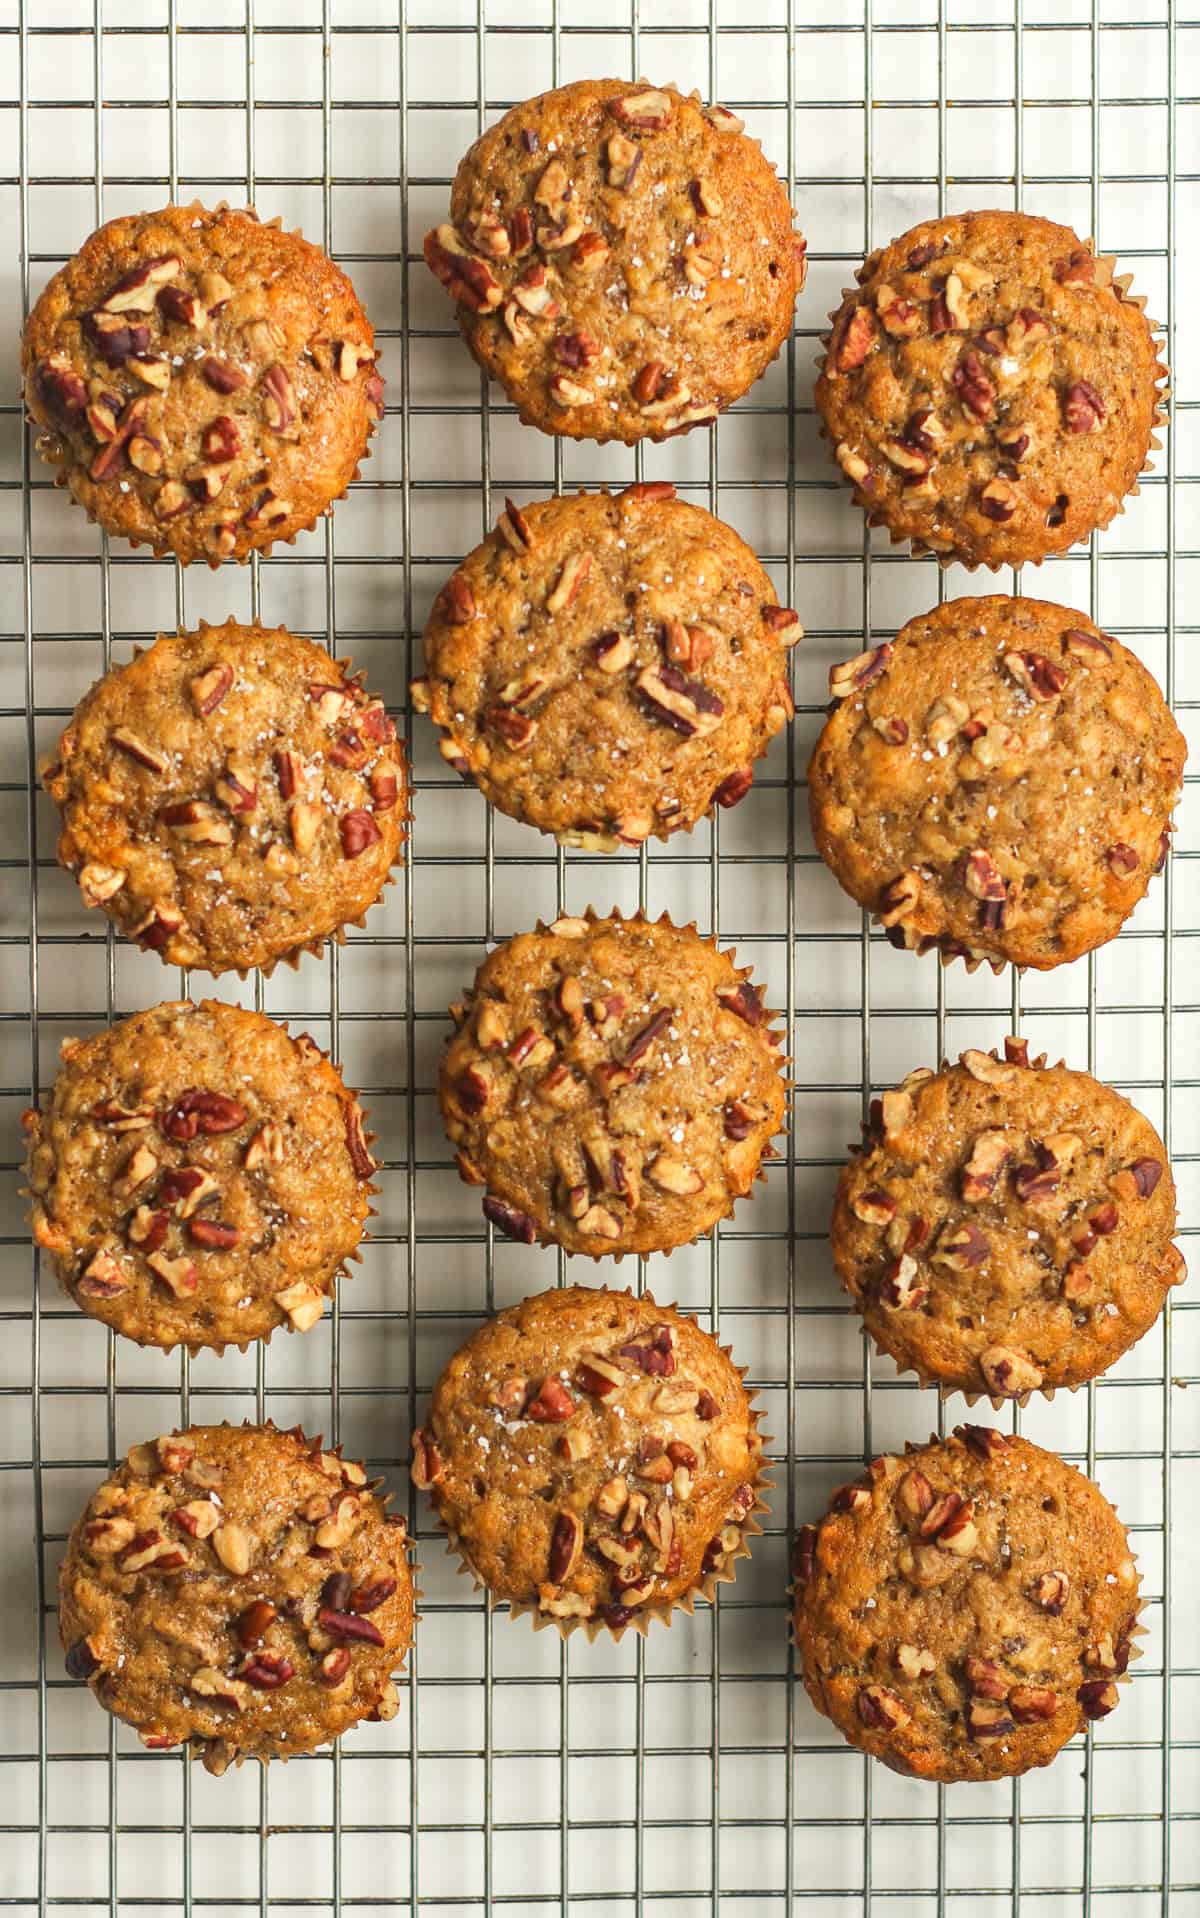 A cooling rack with baked banana muffins with pecans on top.